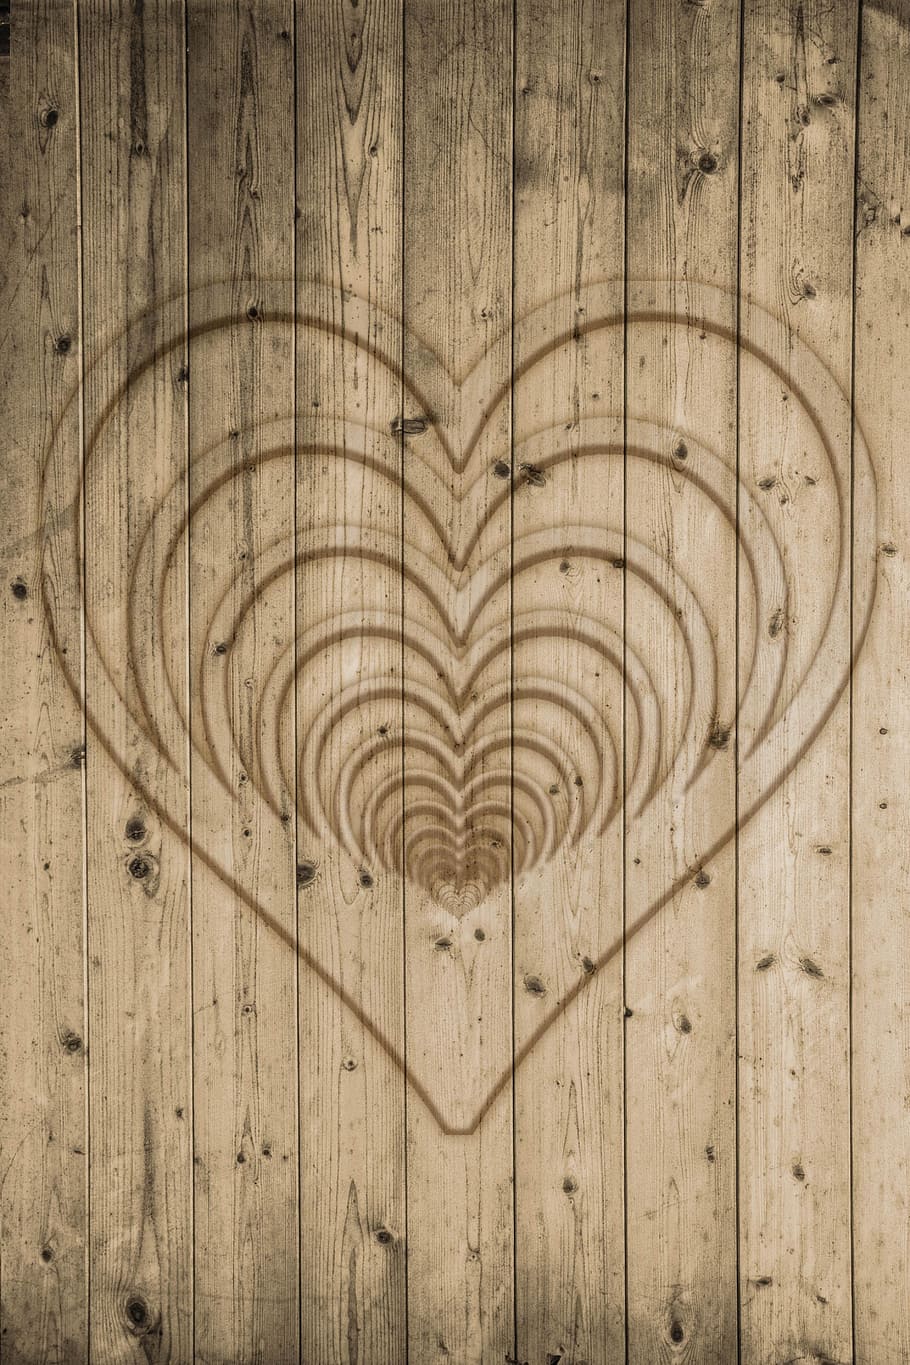 heart wooden art, wood, boards, wall, heart, texture, background, structure, wood plank, wood board